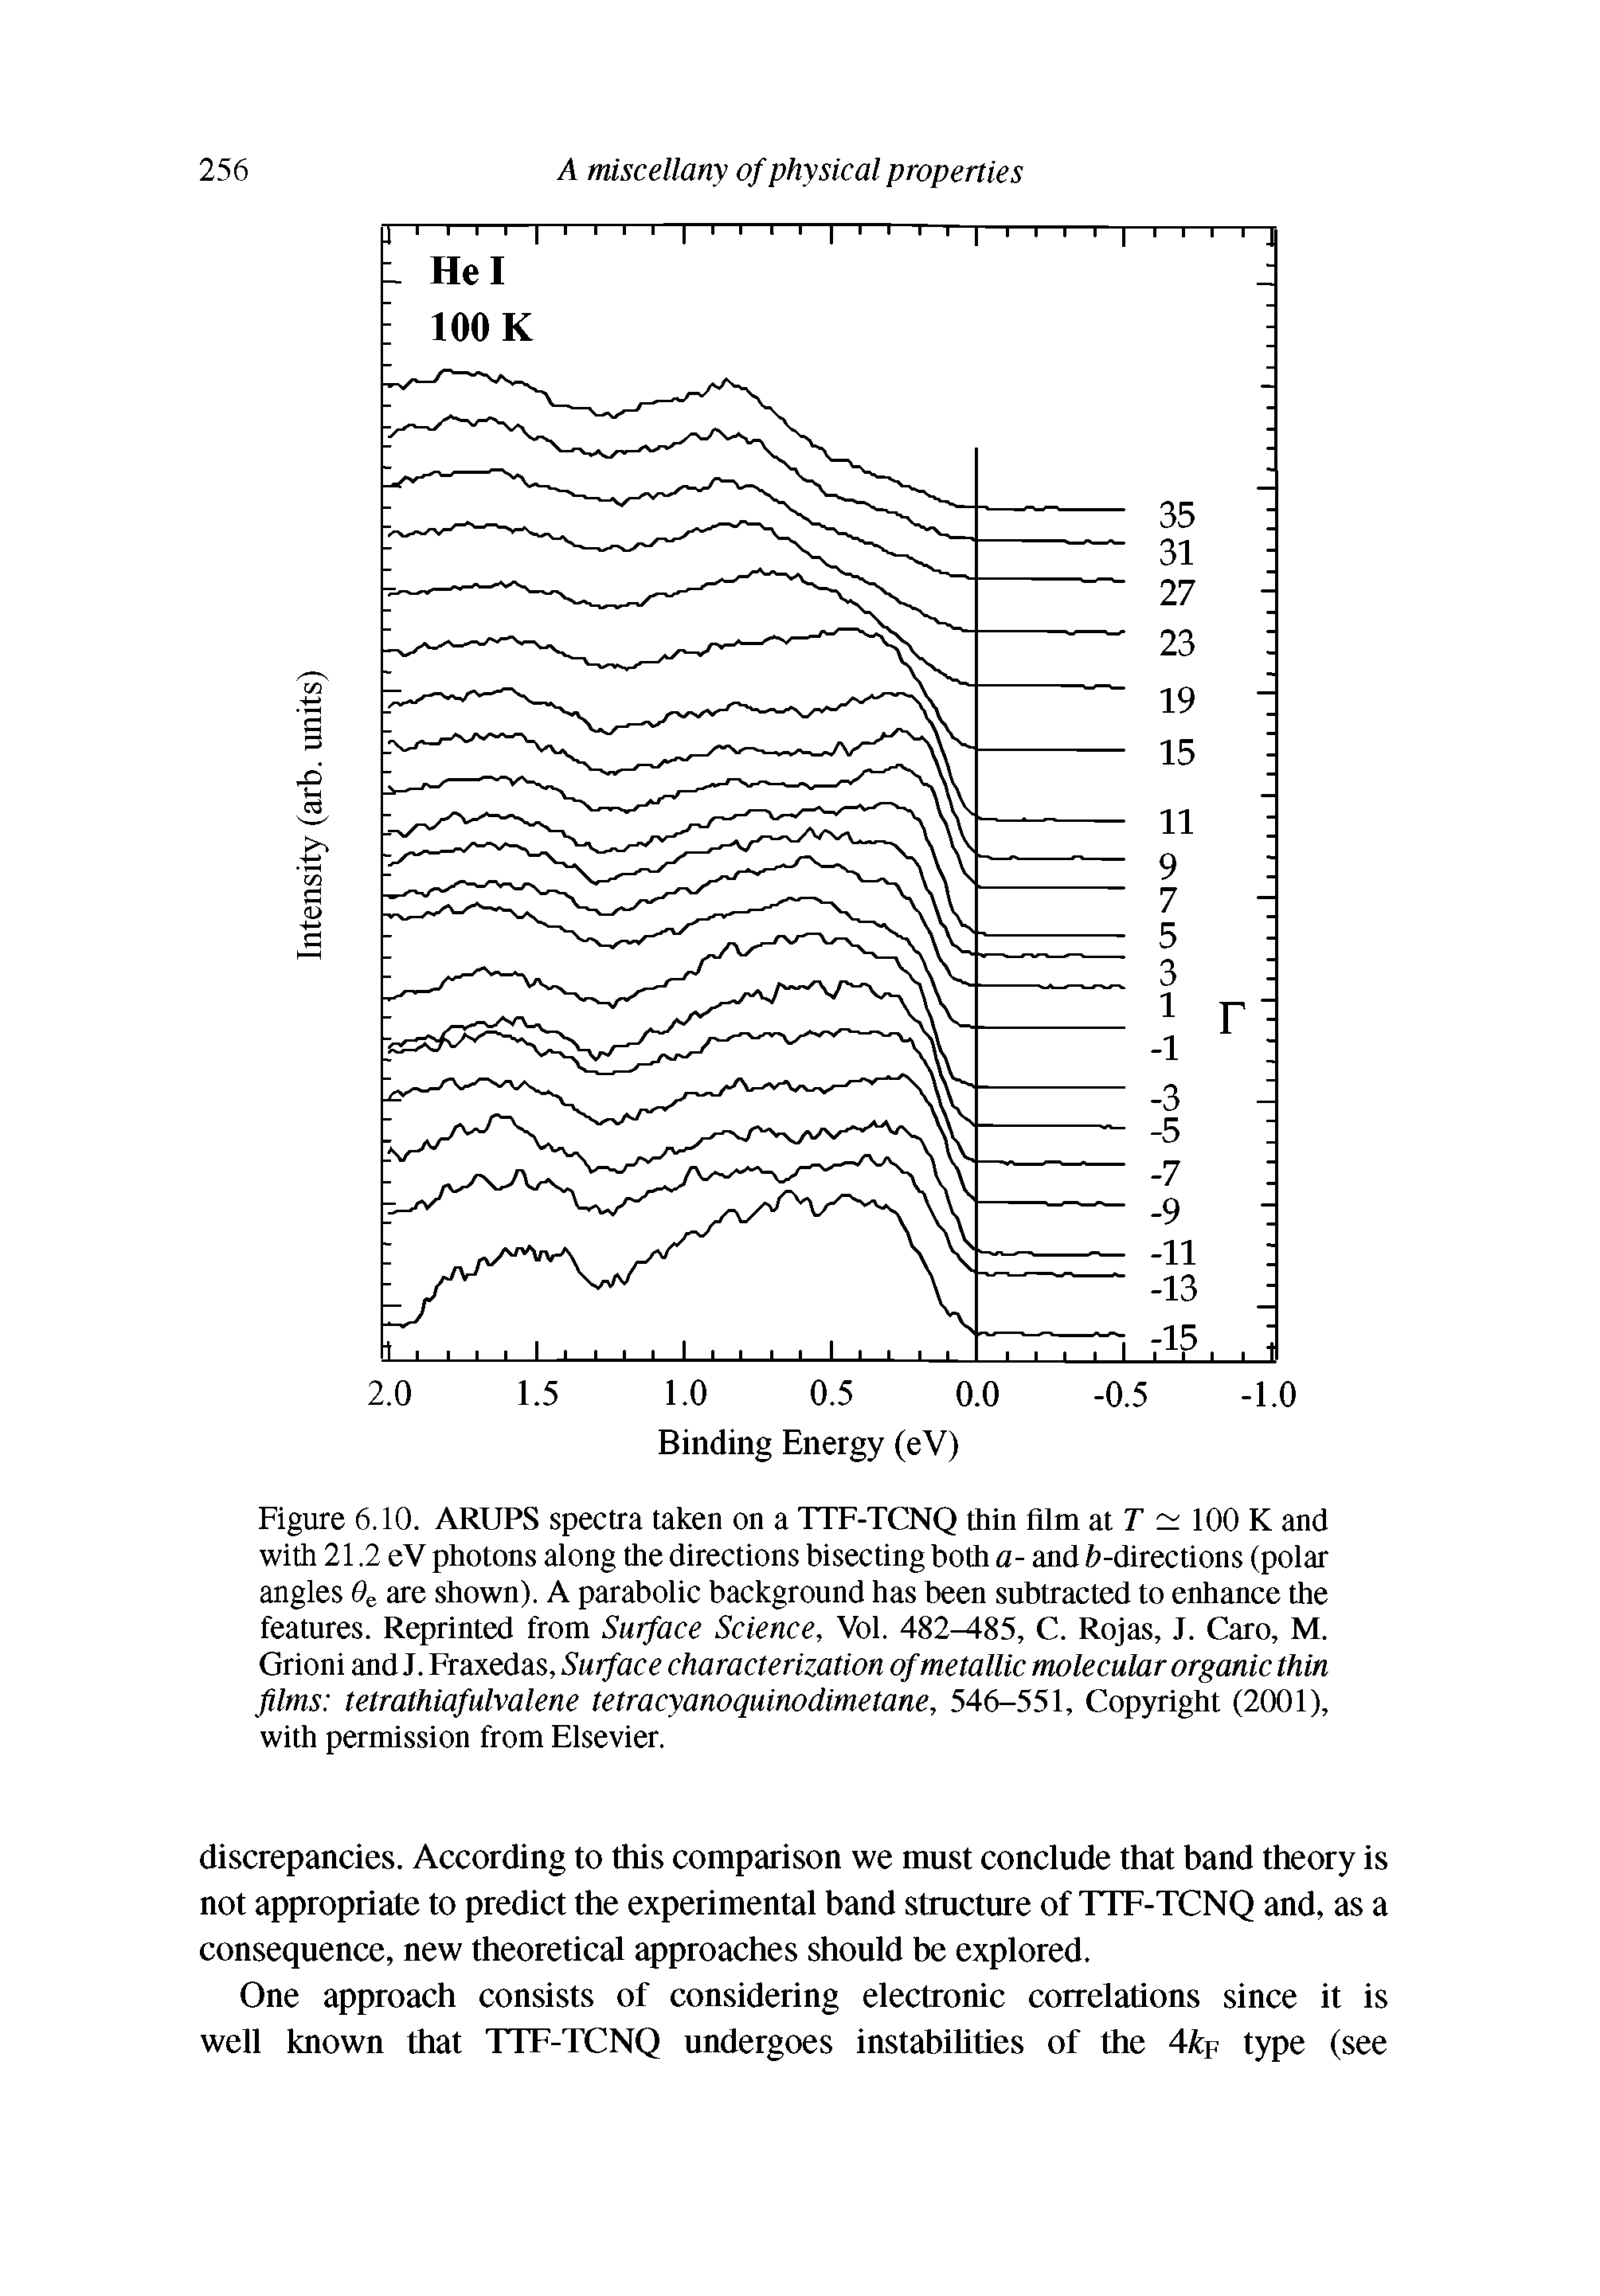 Figure 6.10. ARUPS spectra taken on a TTF-TCNQ thin fllm at F 100 K and with 21.2 eV photons along the directions bisecting both a- and -directions (polar angles 0 are shown). A parabolic background has been subtracted to enhance the features. Reprinted from Surface Science, Vol. 482 85, C. Rojas, J. Caro, M. Grioni and J. Fraxedas, Surface characterization of metallic molecular organic thin films tetrathiafulvalene tetracyanoquinodimetane, 546-551, Copyright (2001), with permission from Elsevier.